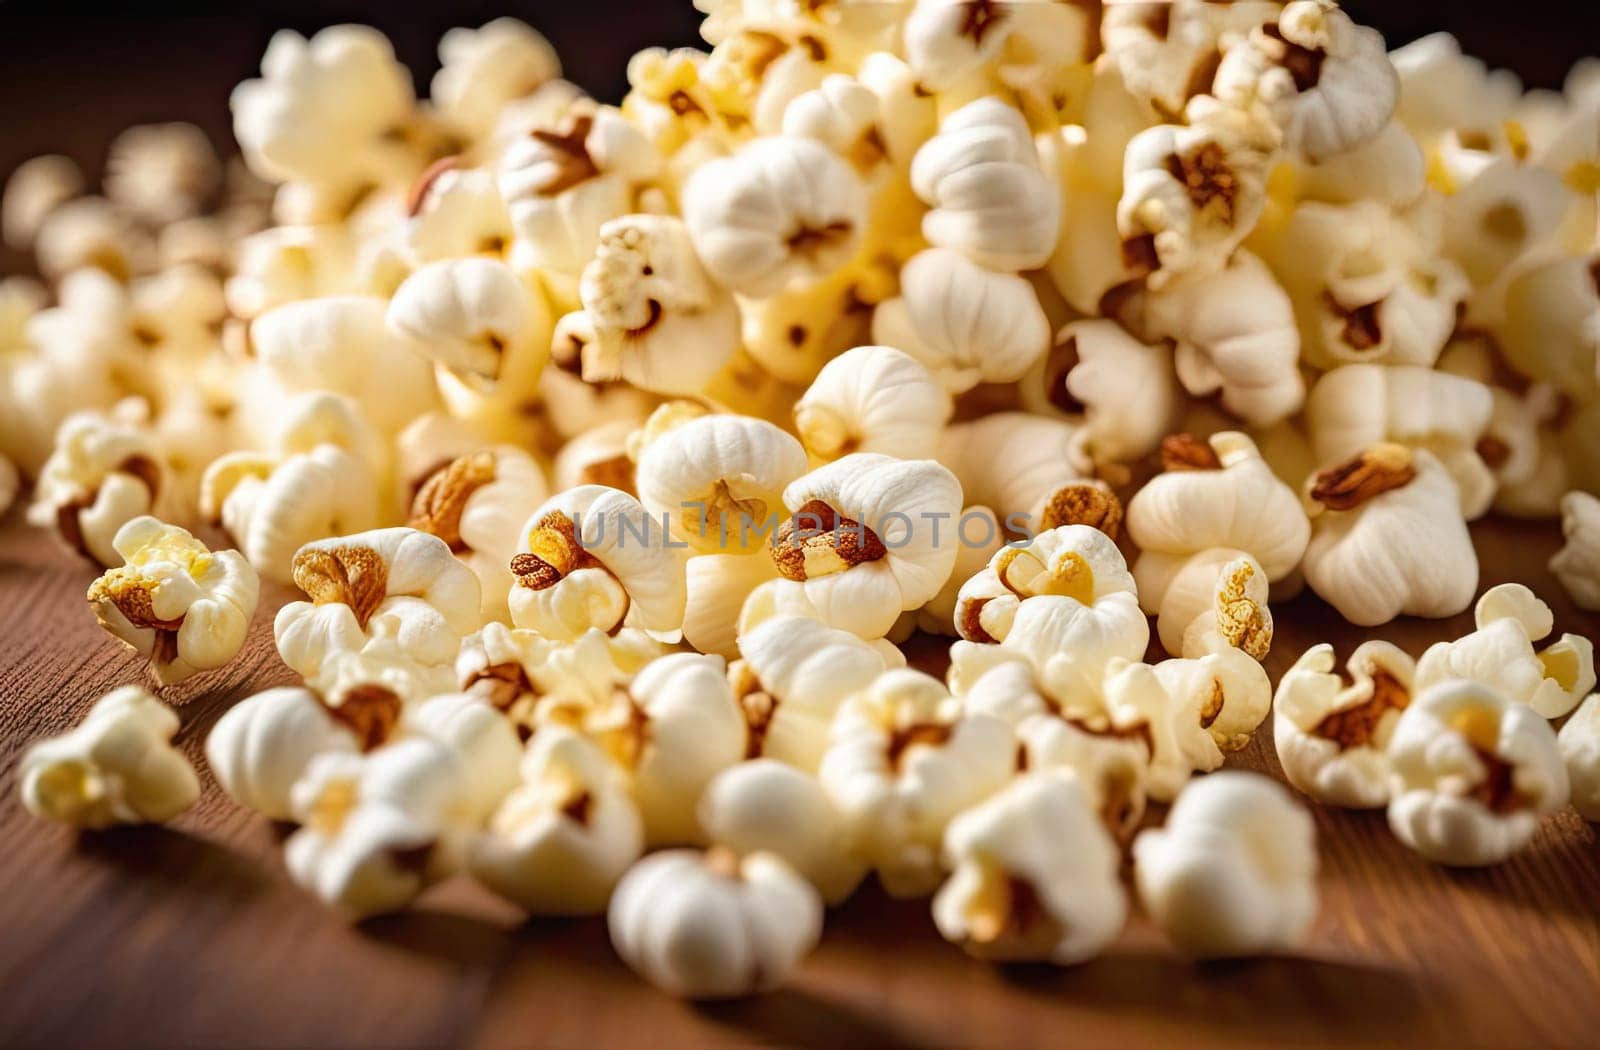 Food, popcorn. Puffed white popcorn is scattered on a wooden table, close-up. A mound of popcorn.